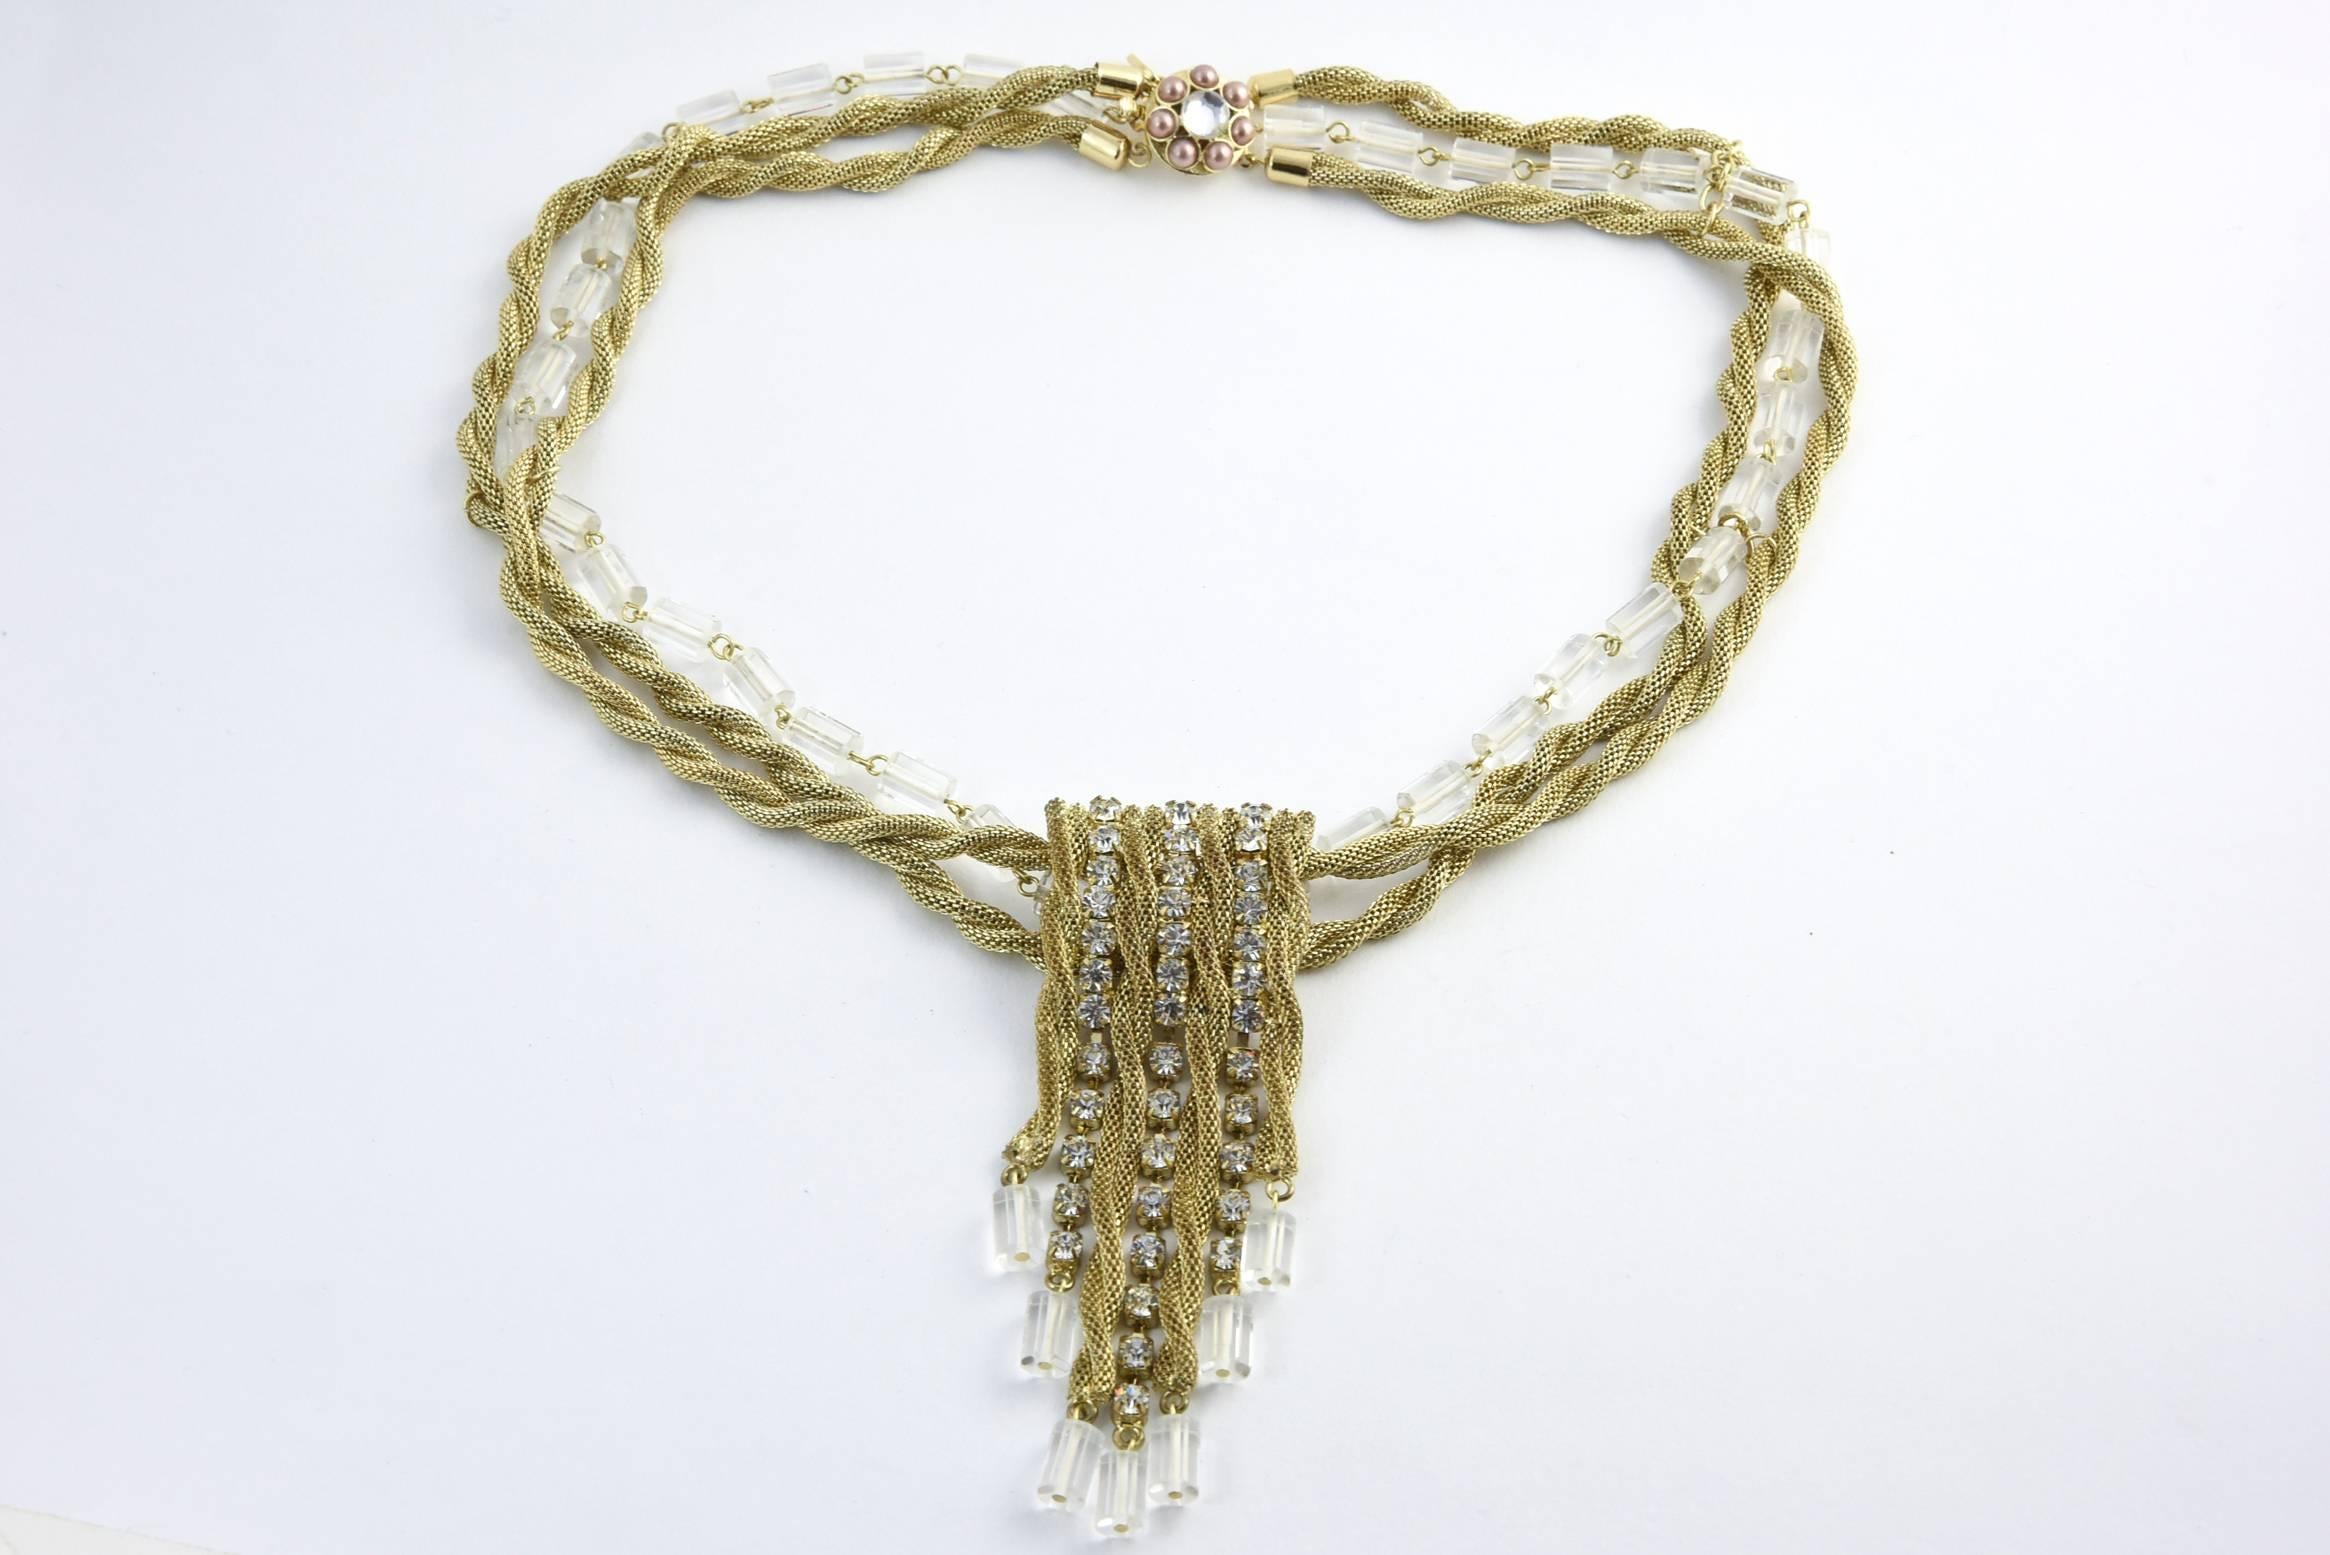 Vintage Scassi goldtone rope necklace surrounding Lucite cylinders and square rhinestones. The clasp has a rhinestone center surrounded by seven faux-pearls. Center rhinestone piece, 4.25